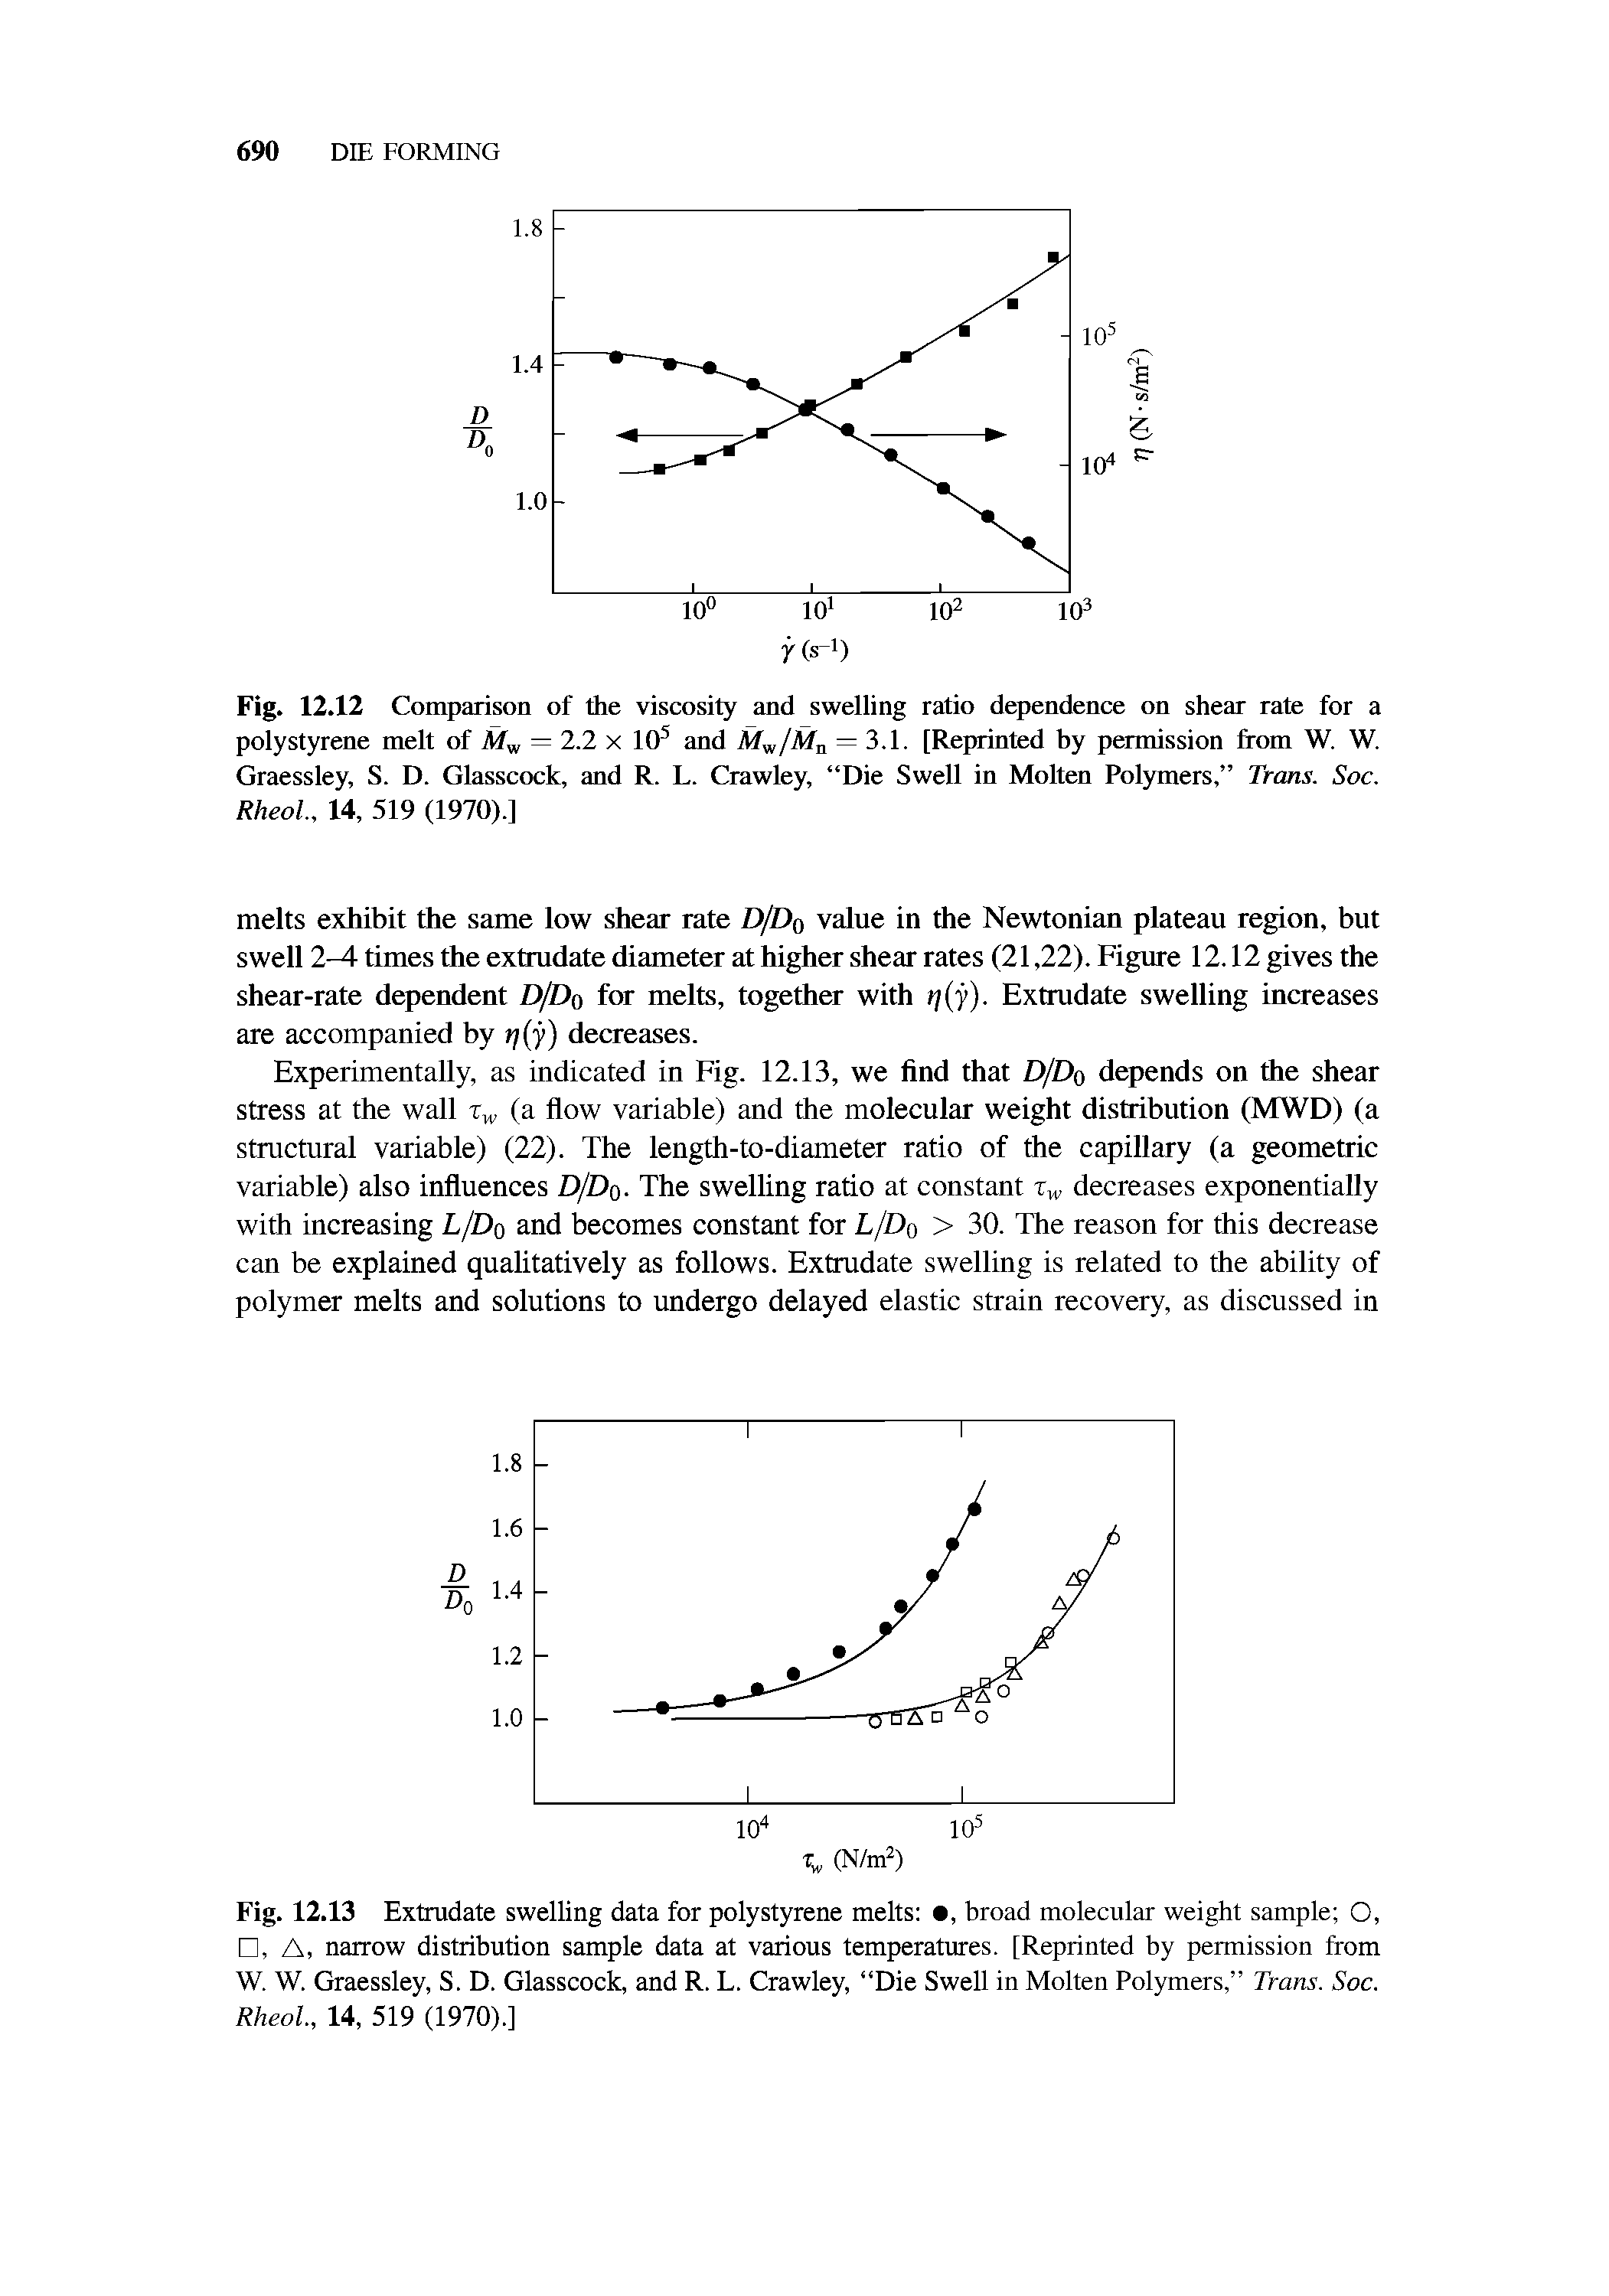 Fig. 12.13 Extrudate swelling data for polystyrene melts , broad molecular weight sample O, , A, narrow distribution sample data at various temperatures. [Reprinted by permission from W. W. Graessley, S. D. Glasscock, and R. L. Crawley, Die Swell in Molten Polymers, Trans. Soc. Rheol., 14, 519 (1970).]...